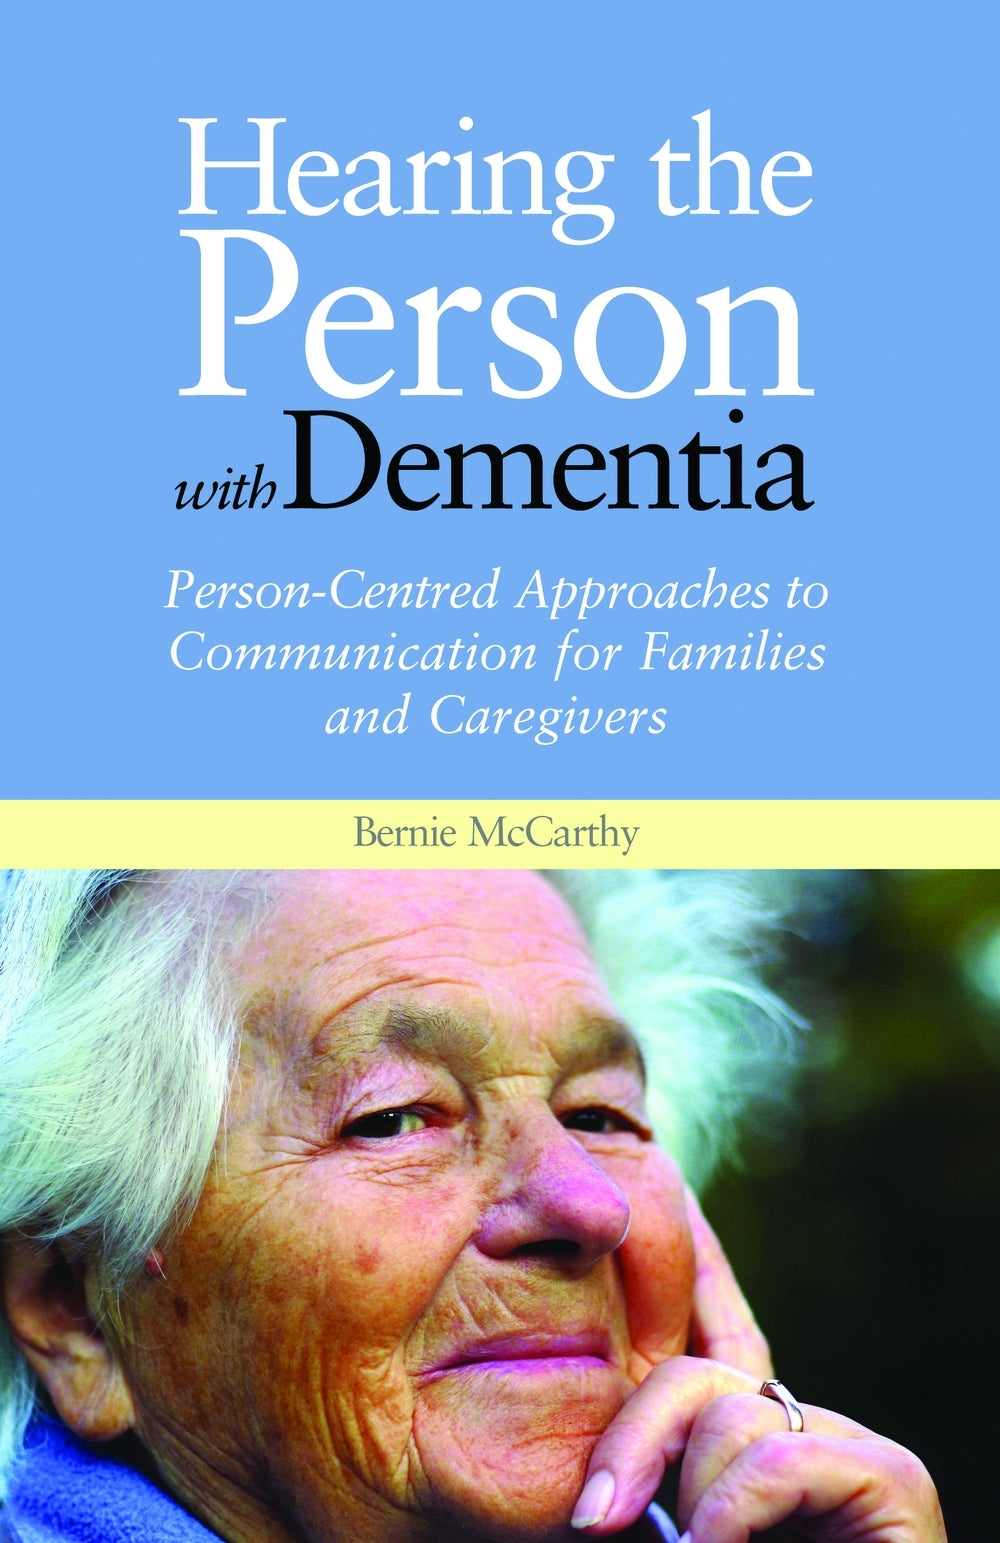 Hearing the Person with Dementia by Bernie McCarthy